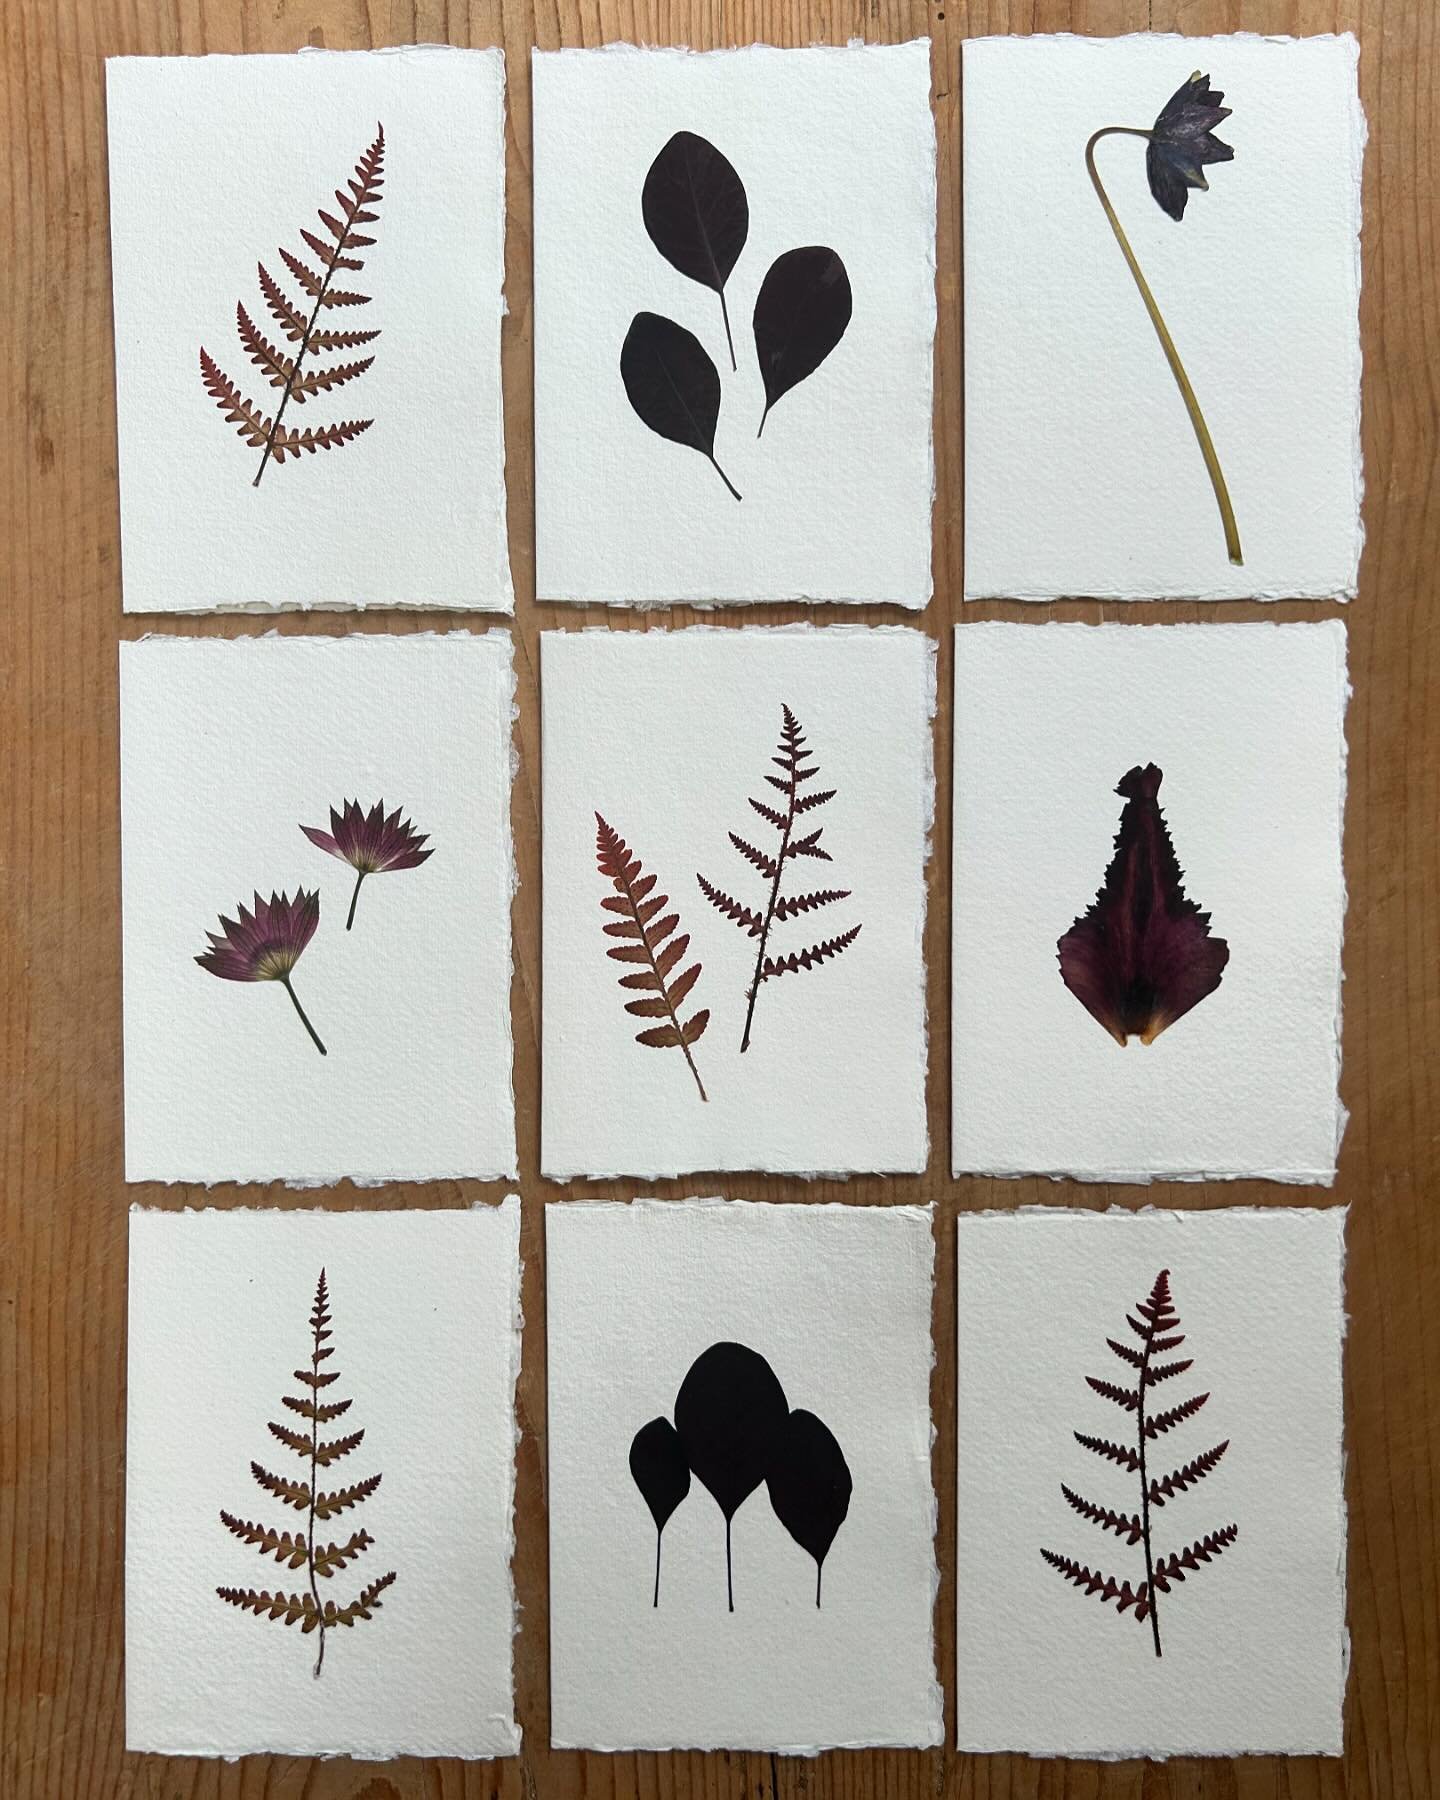 A very small card drop of leaves, fronds &amp; petals from the garden, in shades of blackcurrant &amp; bronze
Grown, gathered &amp; pressed in the garden studio on Khadi cotton rag paper. 

(If you want to buy just a card or two I can refund the stan